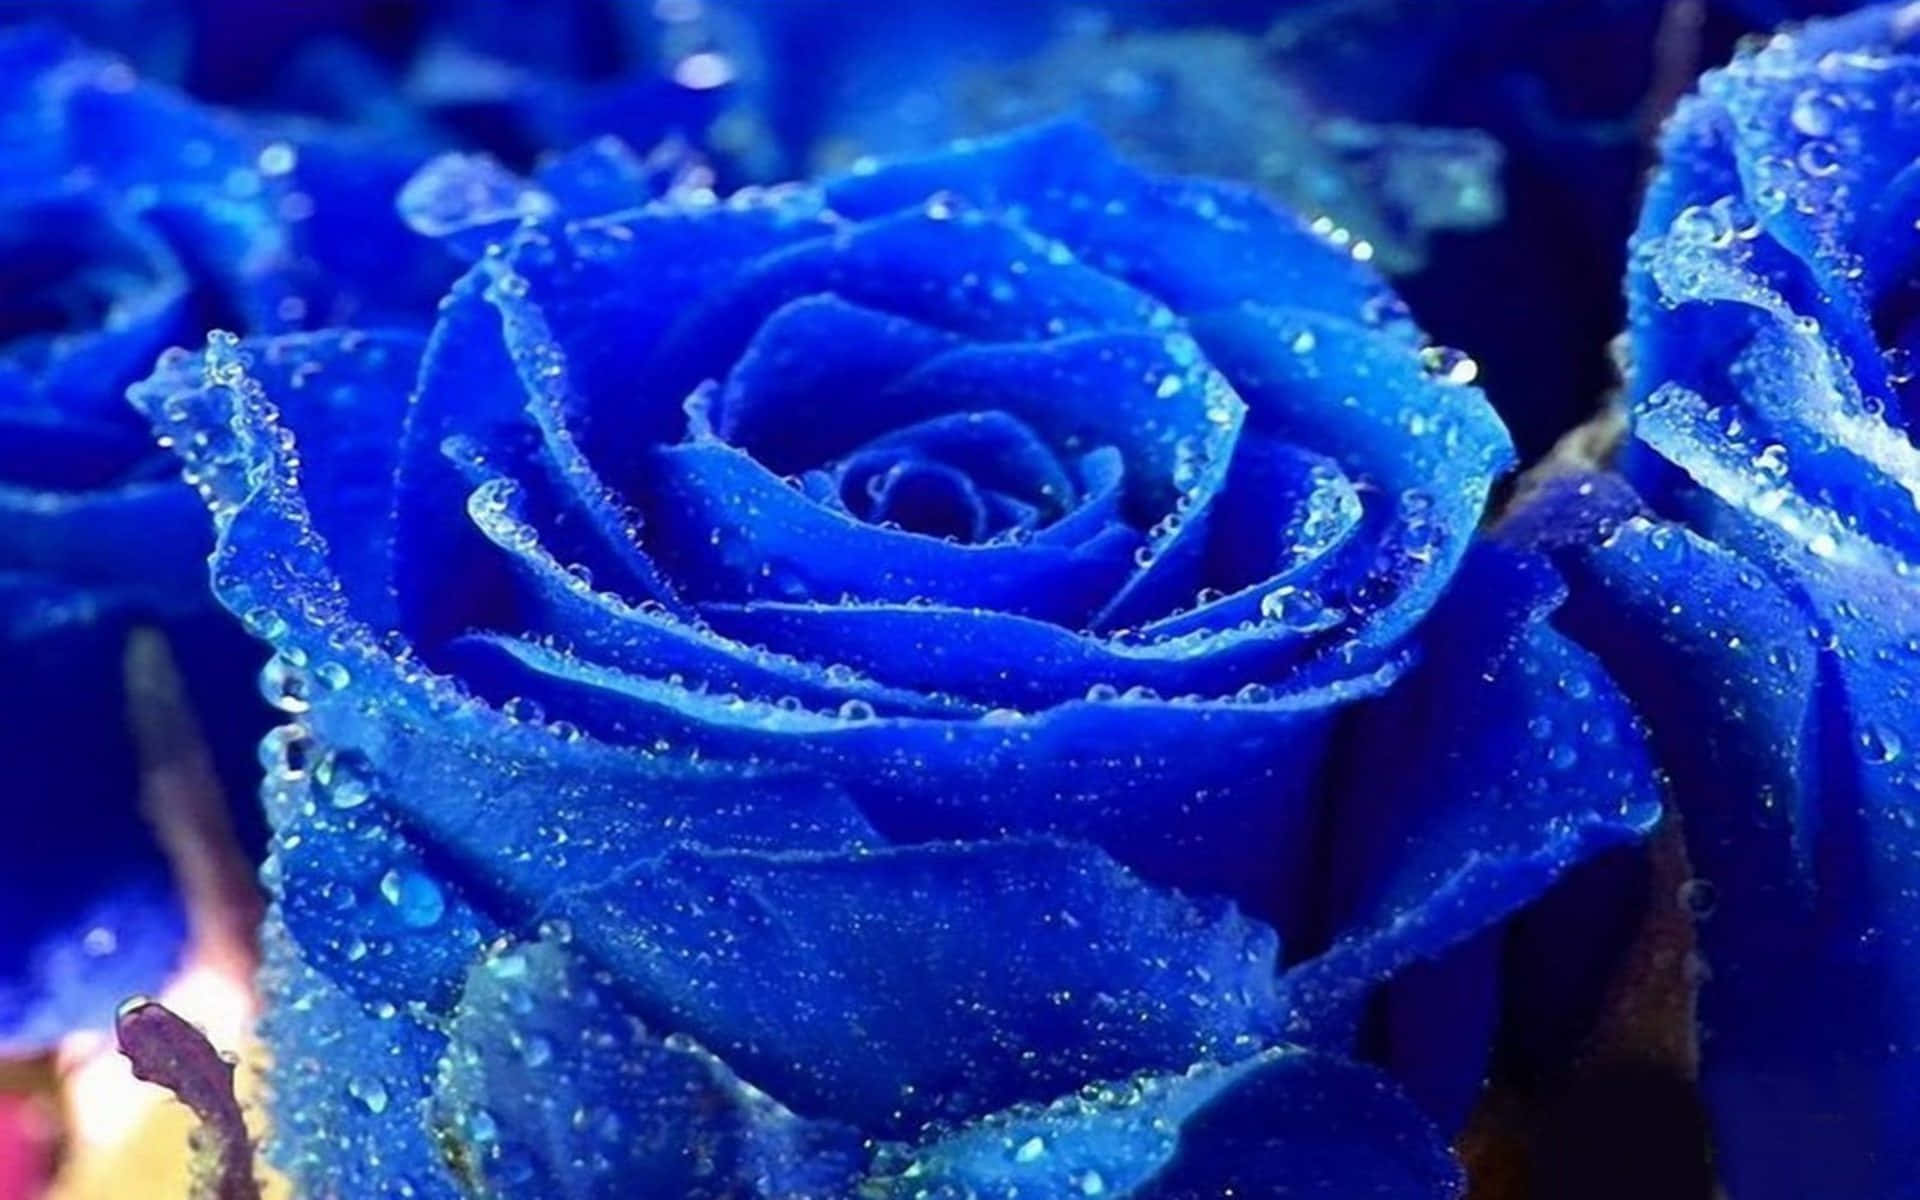 Blue Roses With Water Droplets On Them Wallpaper